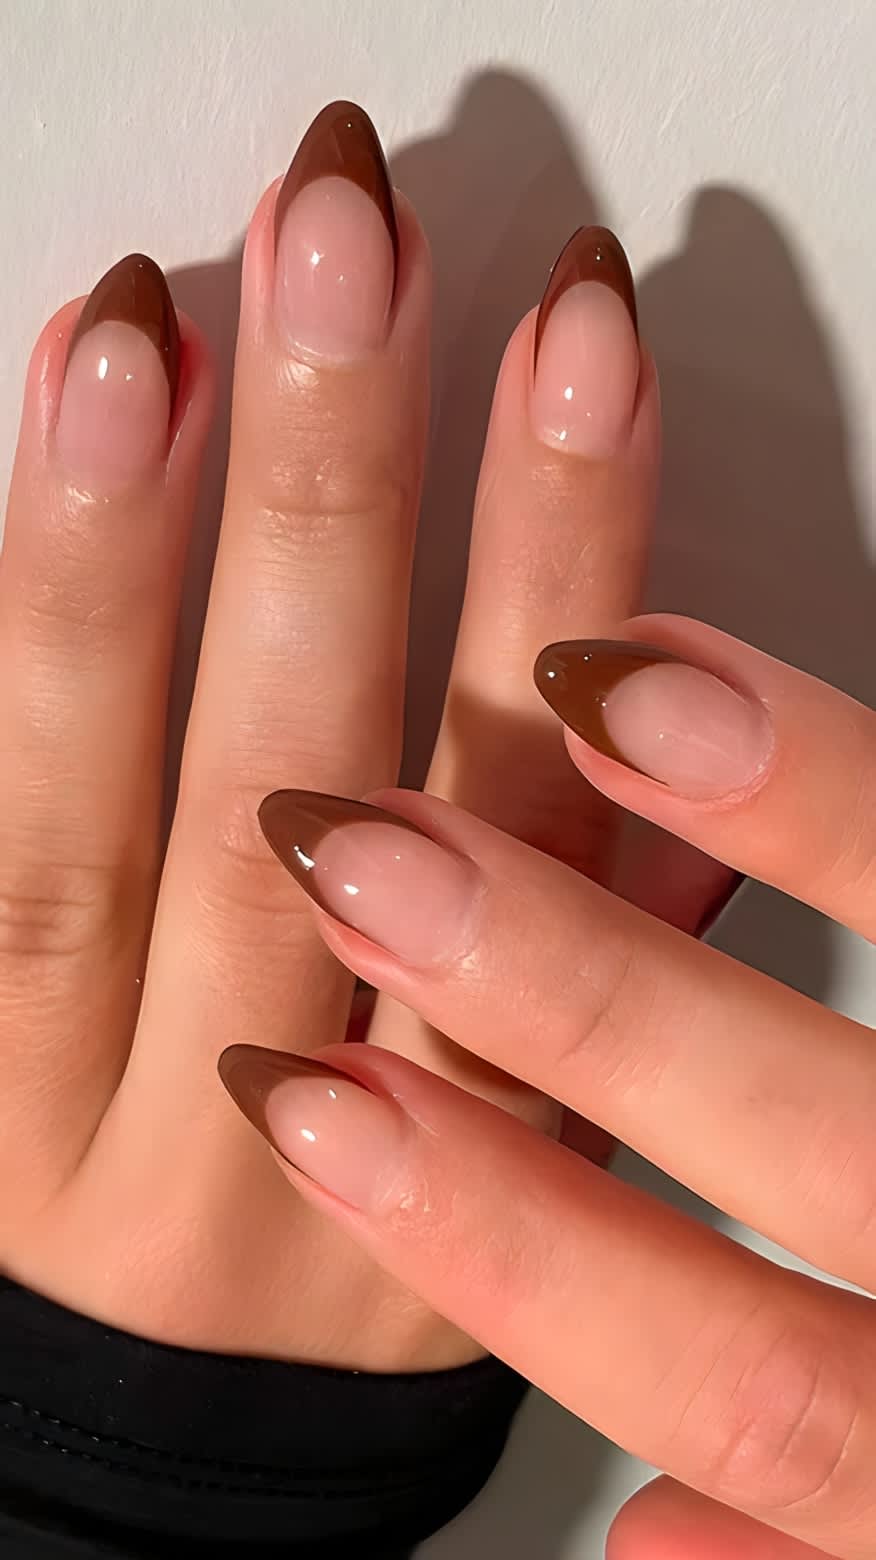 Nails with brown tips